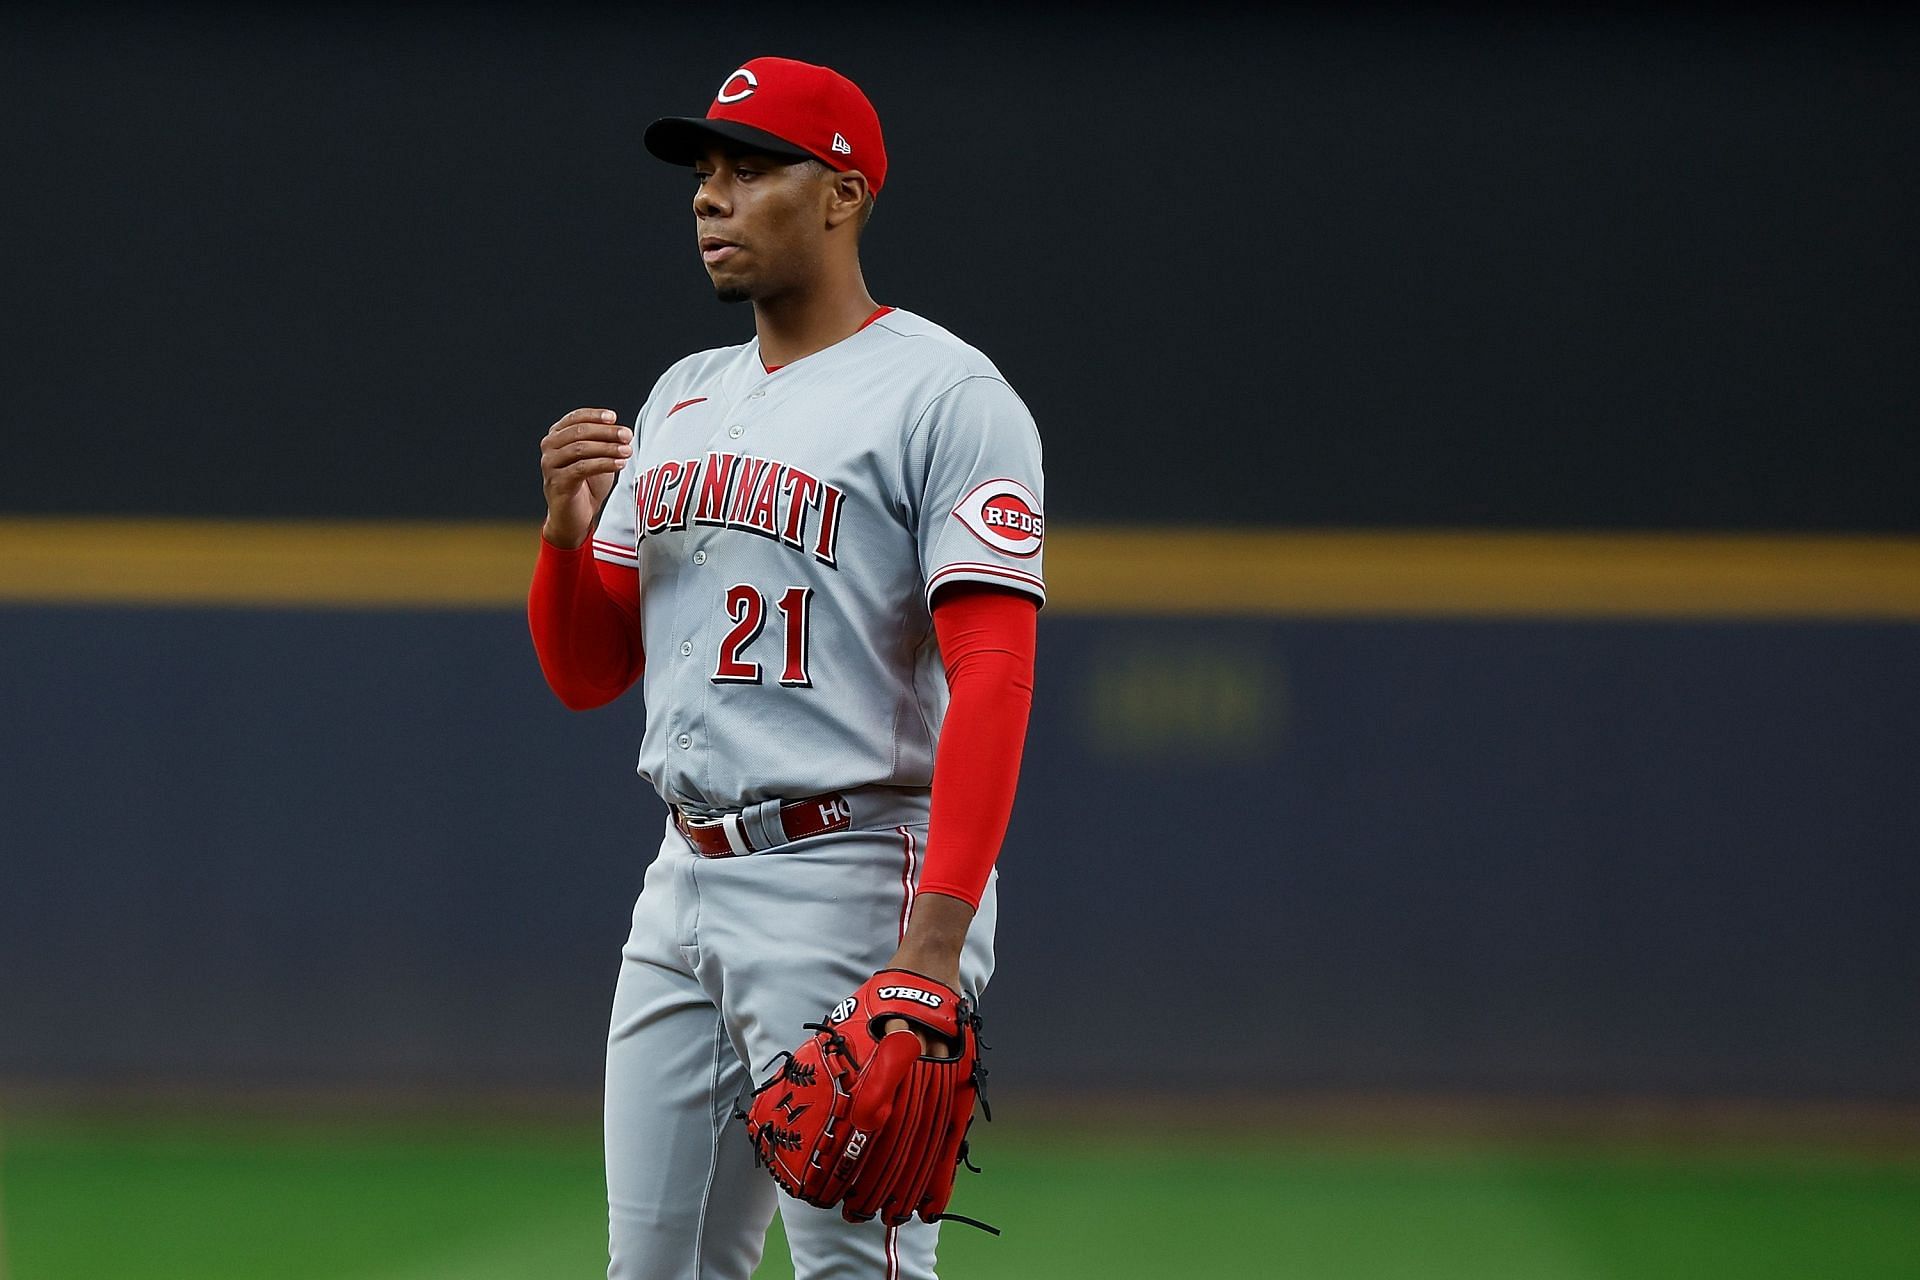 Hunter Greene getting tattooed and the Reds are watching him burn” - MLB  Twitter reacts after the Dodgers school Cincinnati Reds rookie Hunter Greene  with 8 hits and 5 runs in just 3 innings